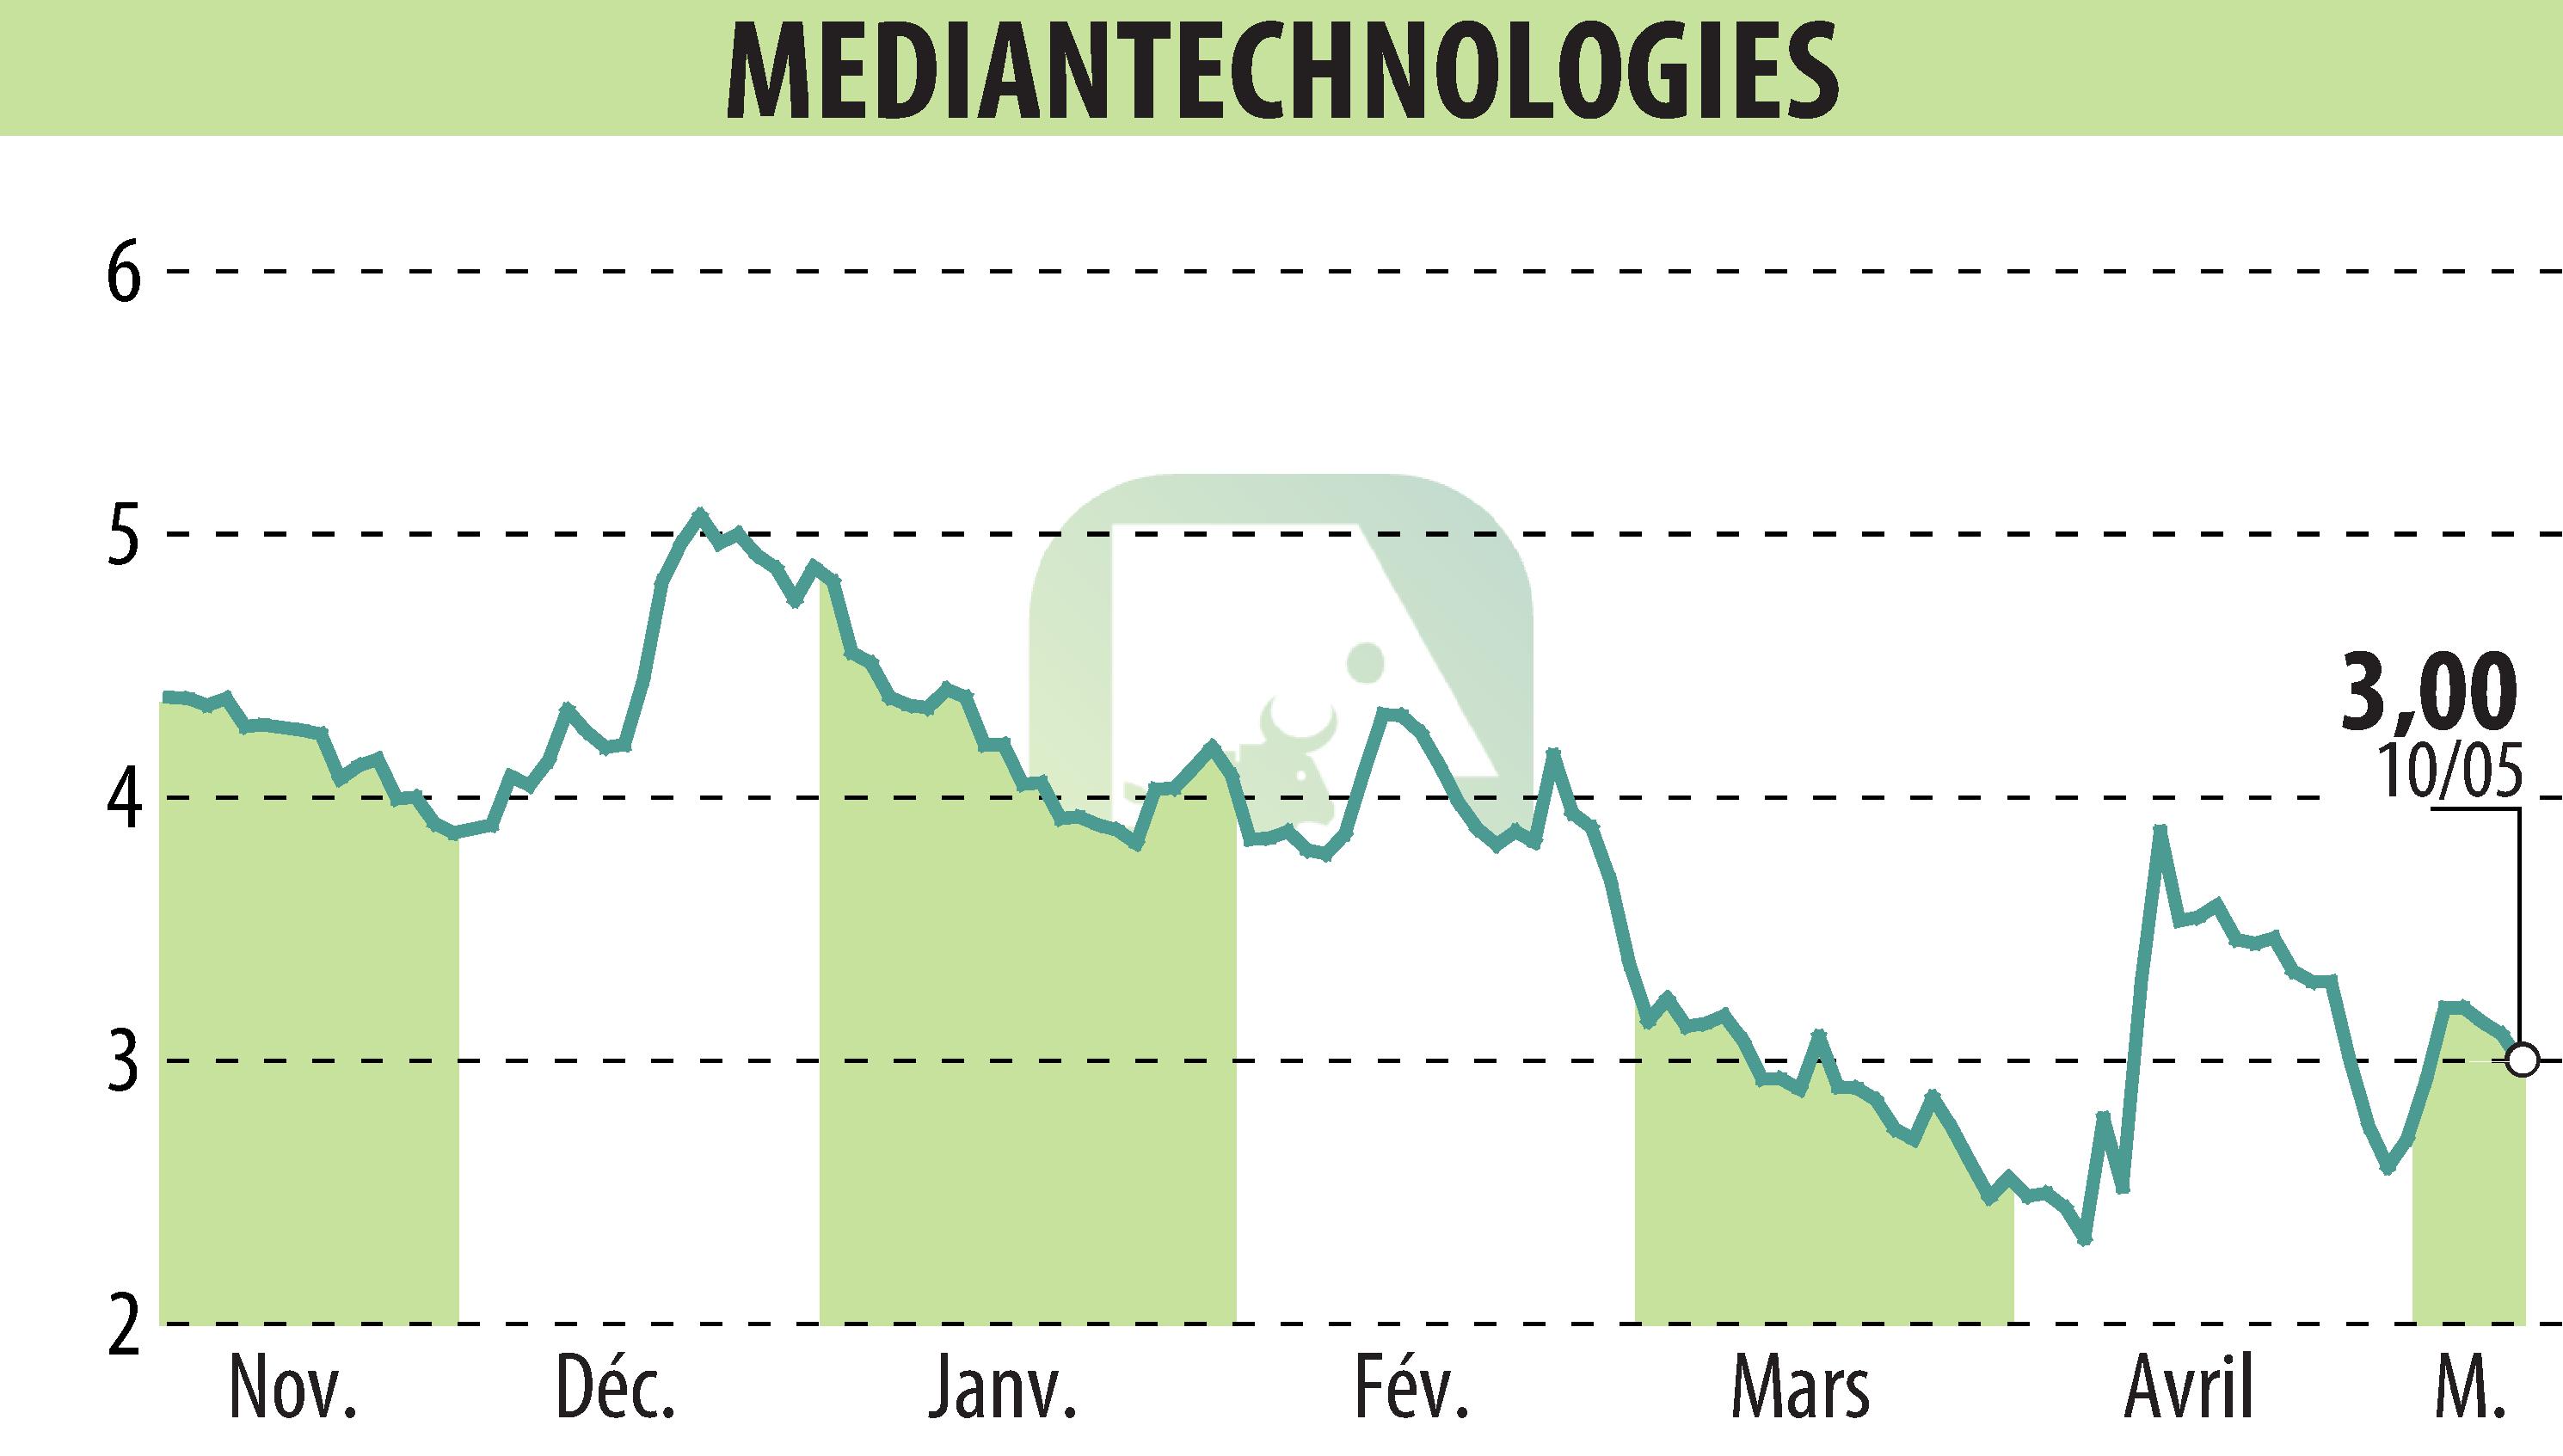 Stock price chart of MEDIAN TECHNOLOGIES (EPA:ALMDT) showing fluctuations.